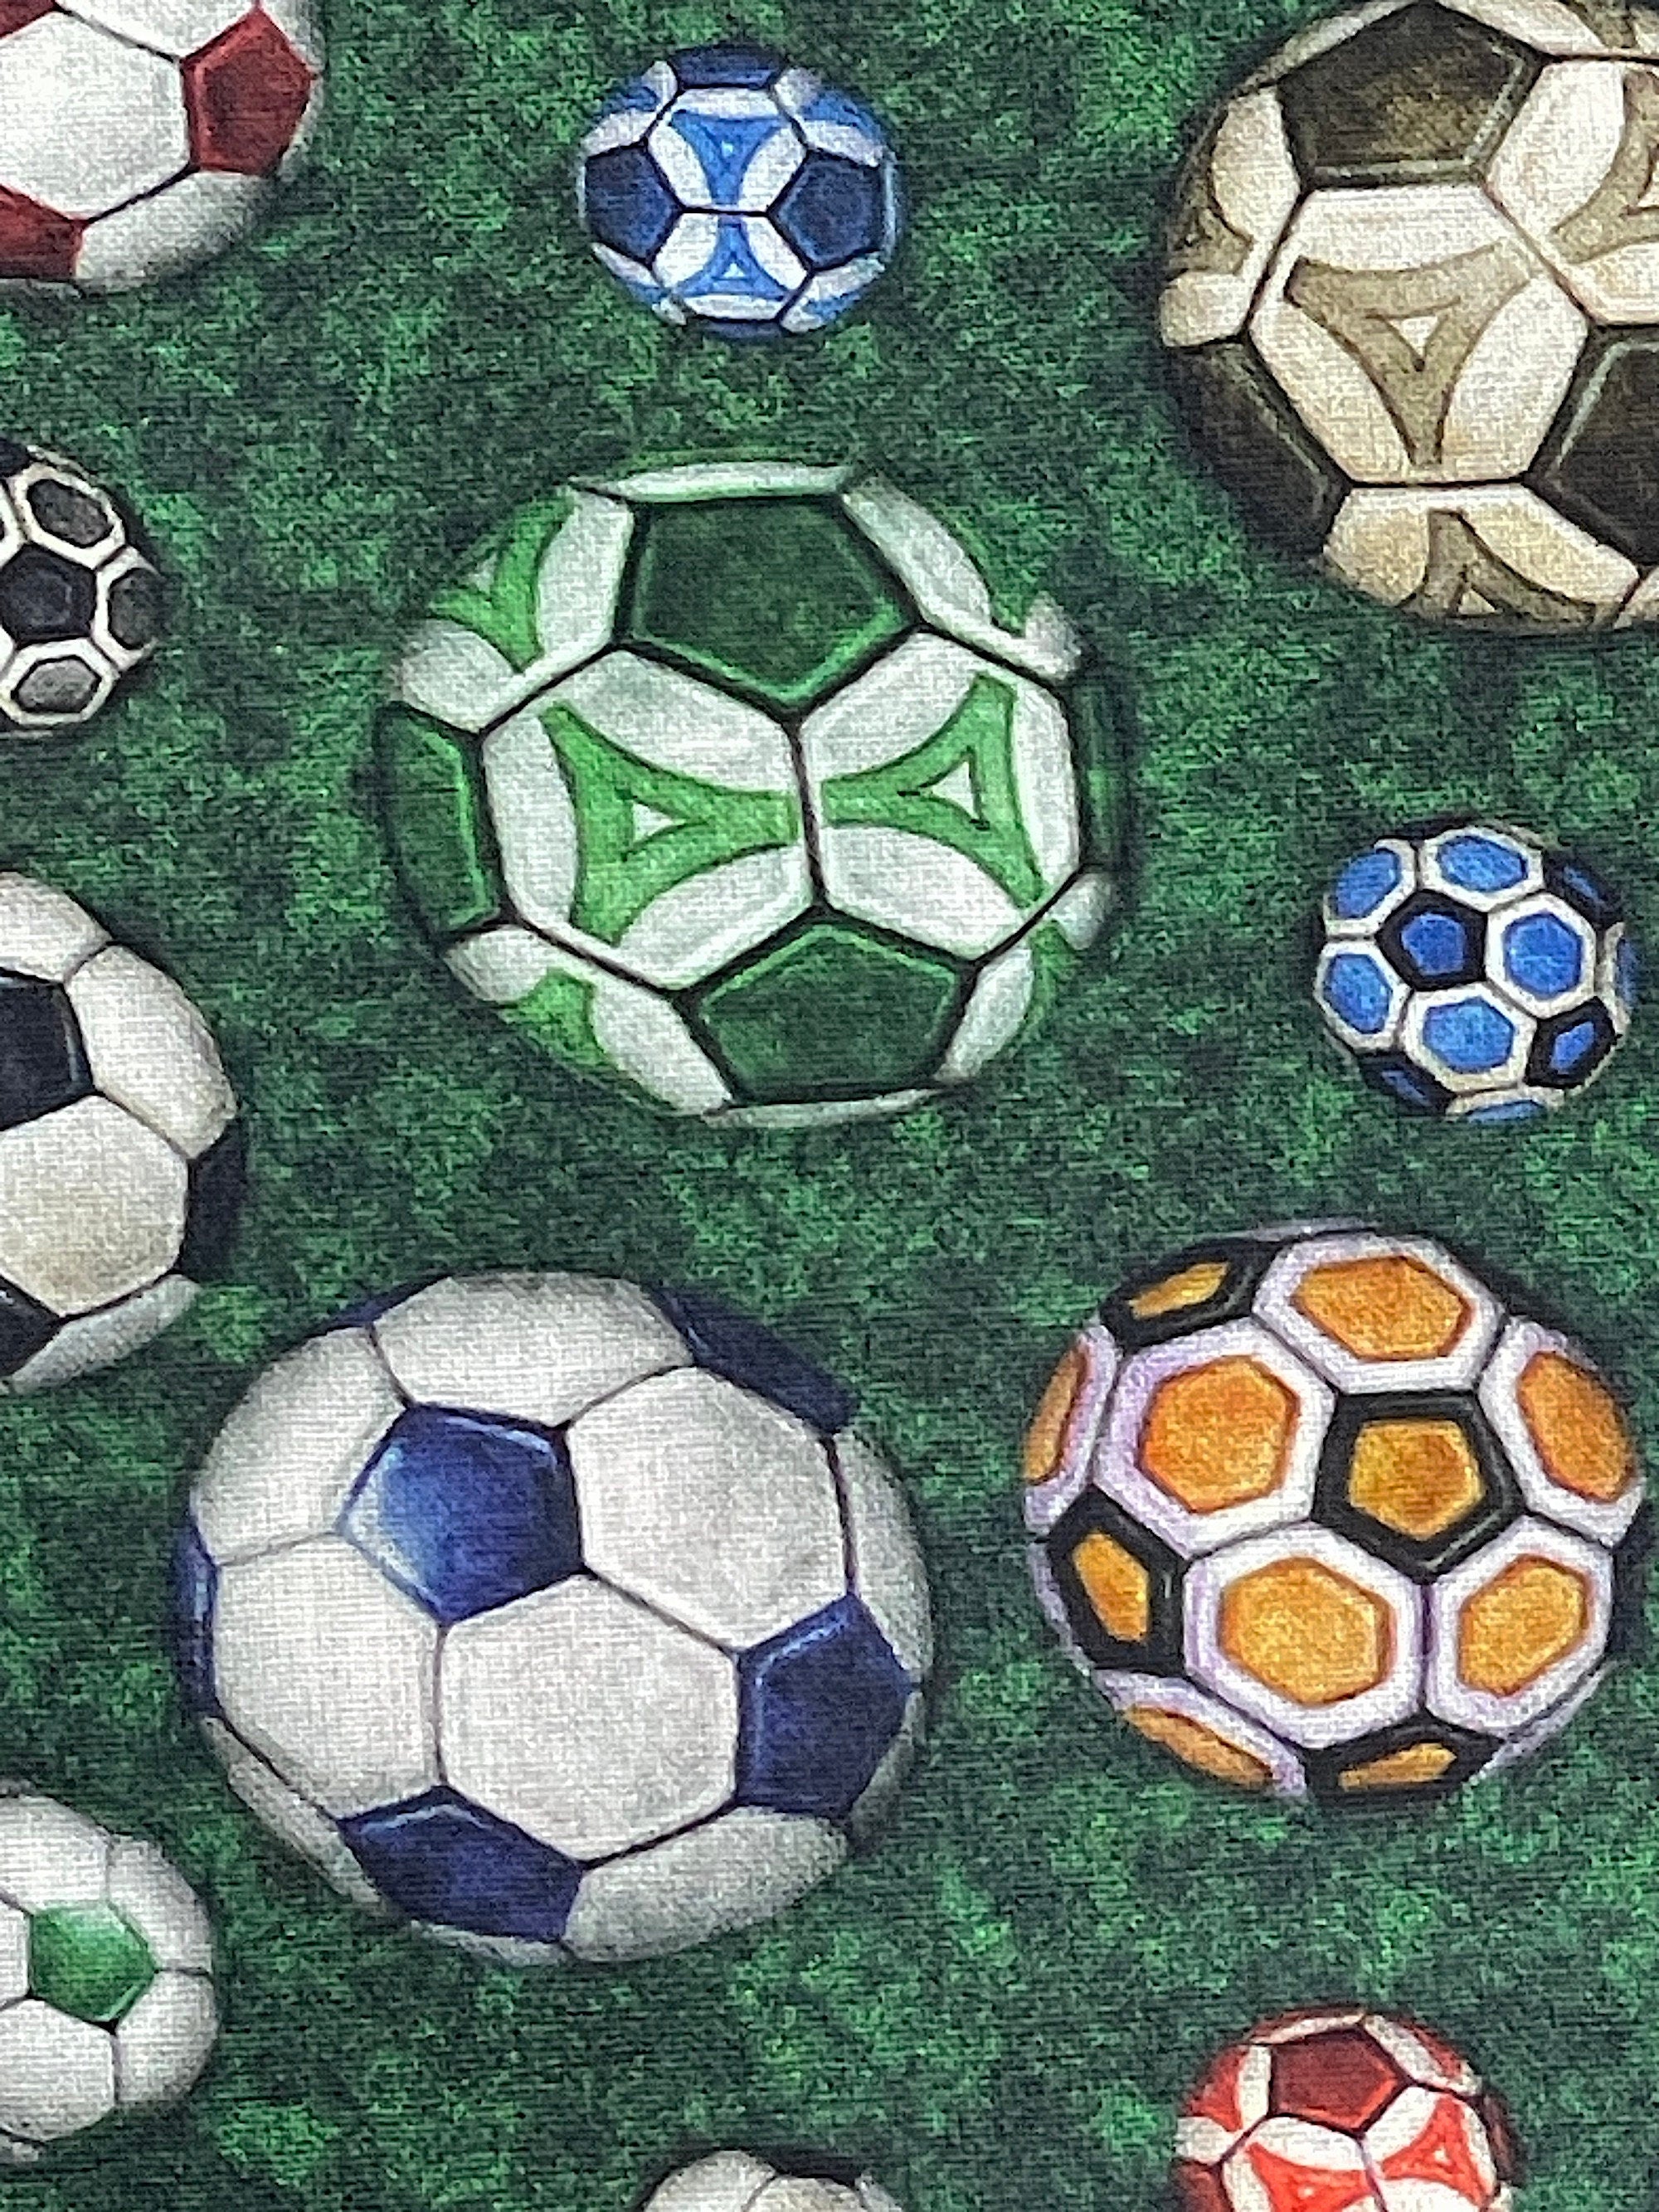 Close up of green, yellow, blue and white soccer balls.